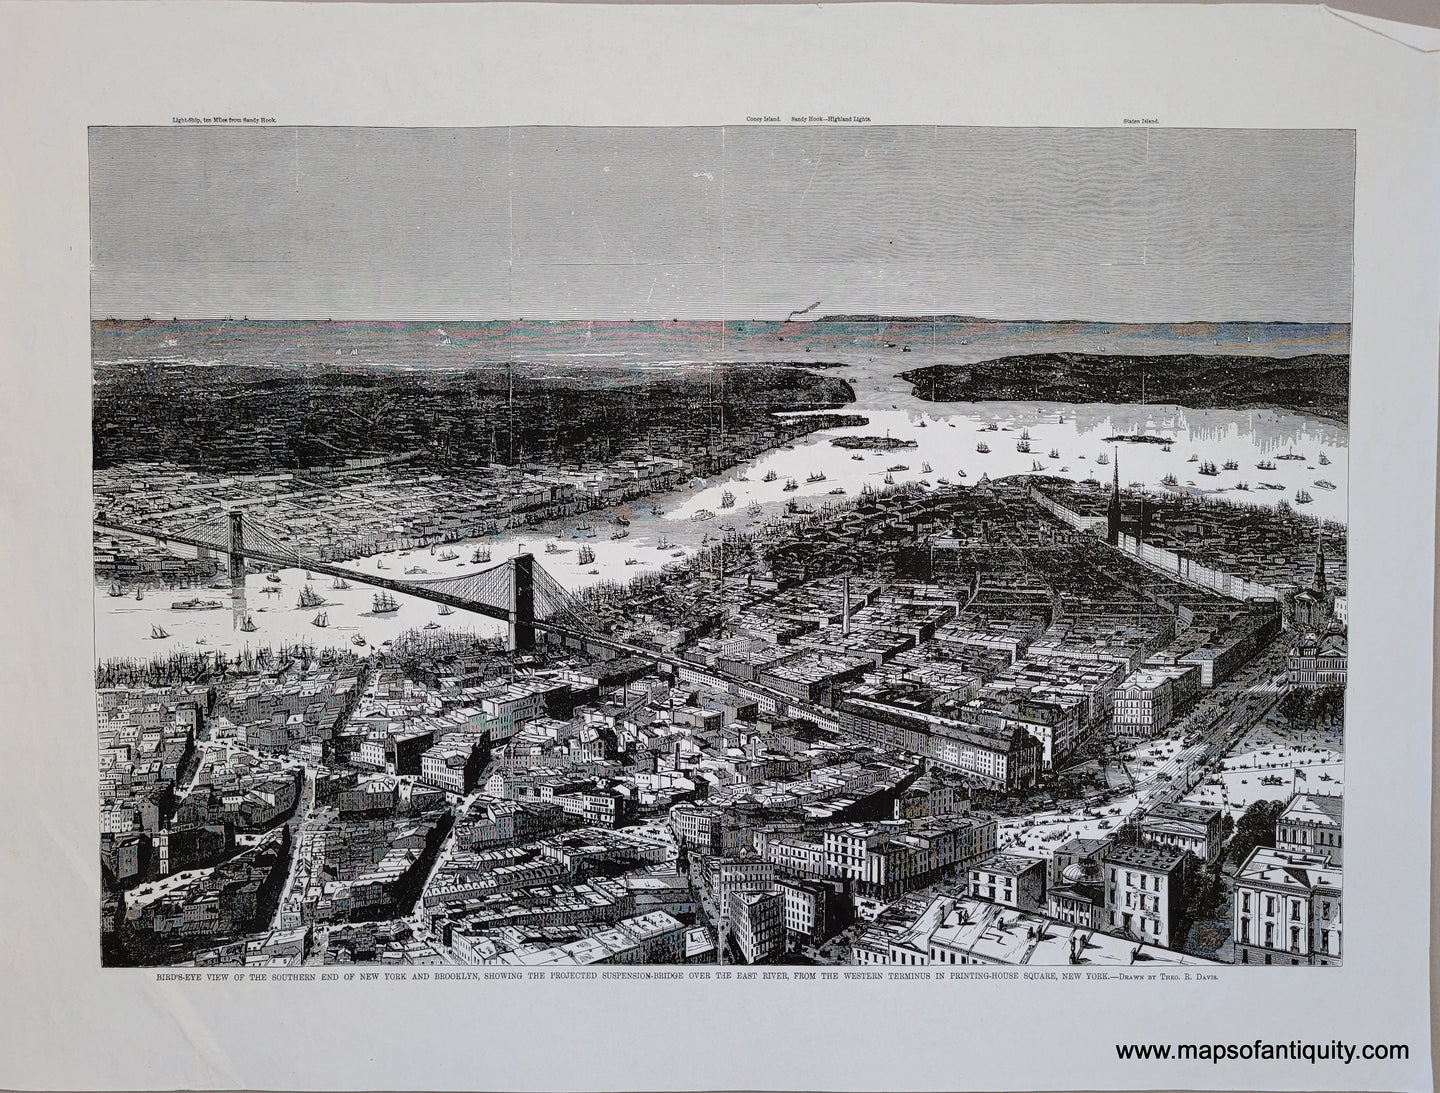 Digitally-Engraved-Specialty-Reproduction-Bird's-Eye-View-of-Southern-End-of-New-York-and-Brooklyn-Showing-the-Projected-Suspension-Bridge-Over-the-East-River-from-the-Western-Terminus-in-Printing-House-Square-New-York---Reproduction--Reproduction-Maps-Of-Antiquity